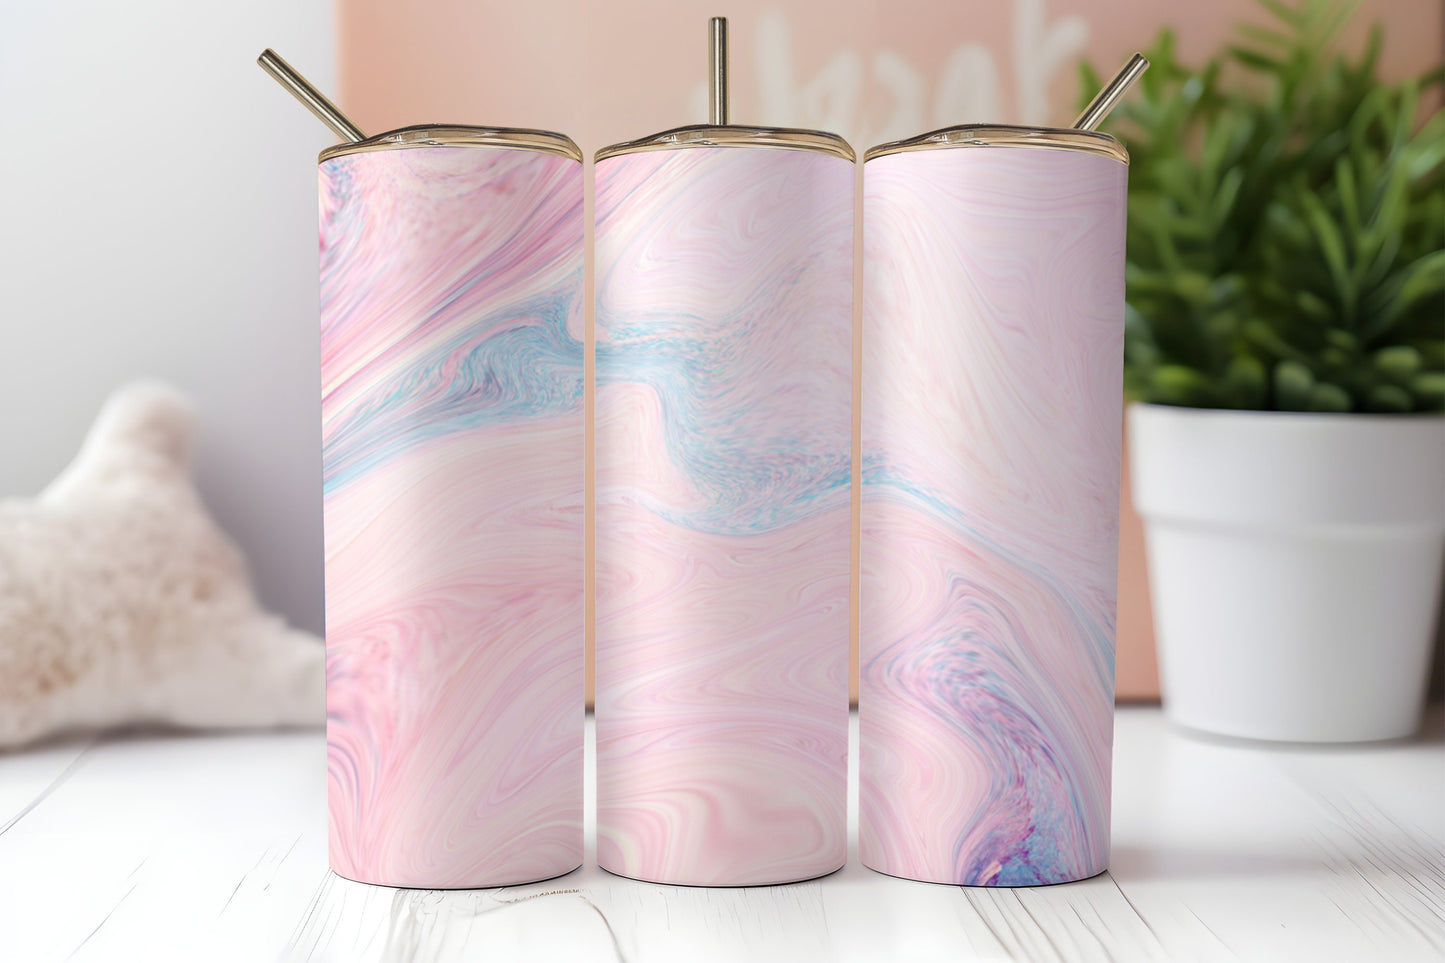 Customized Marble Paint Pour 20 oz Skinny Tumbler - Personalized Swirl Design Cup - Elegantly Drinkware